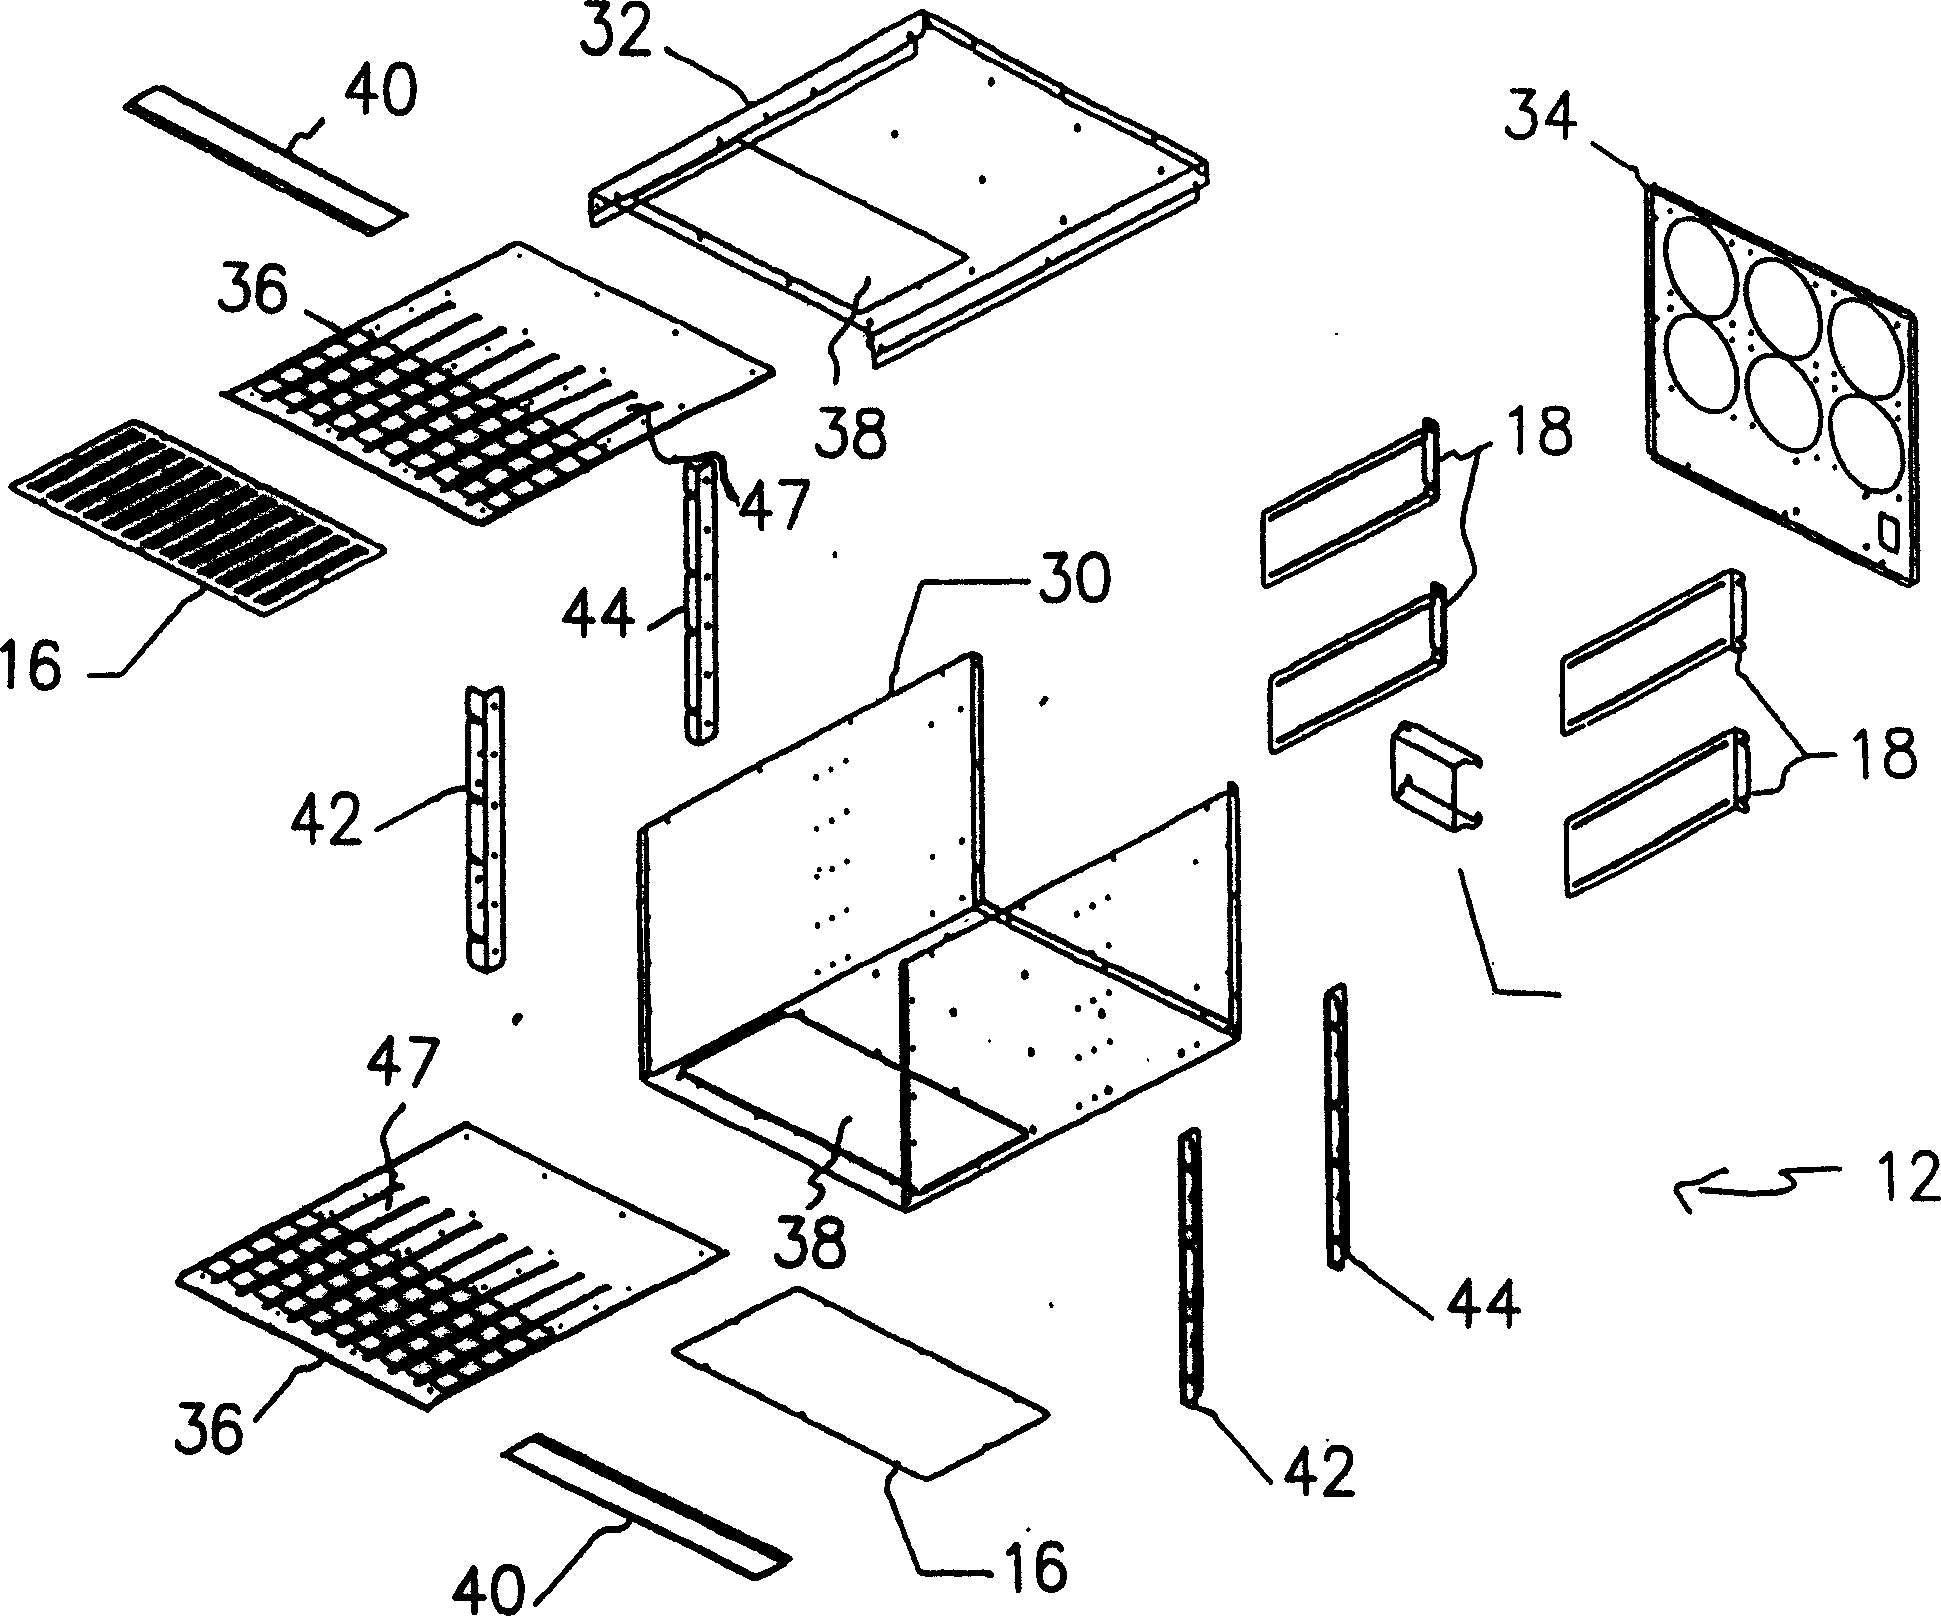 Computer system and method for cooling computer system